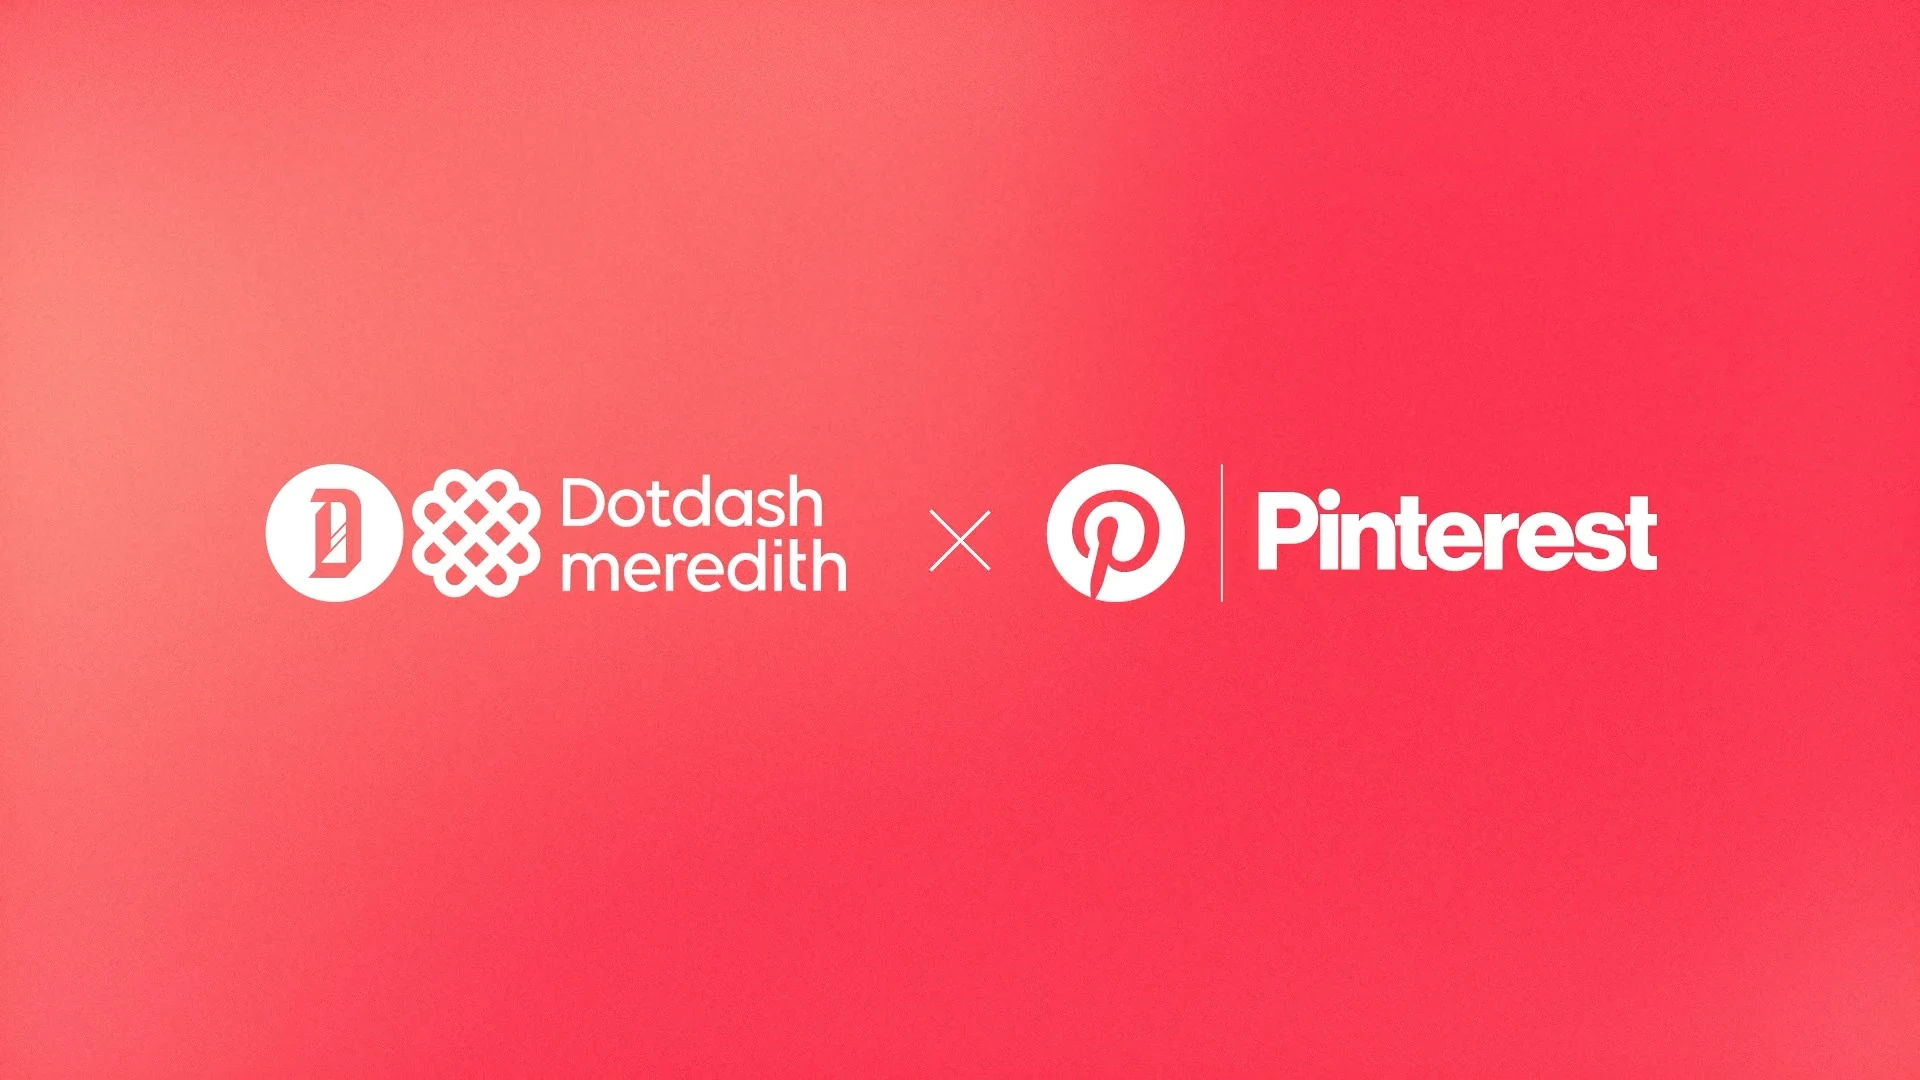 Pinterest partners with Dotdash Meredith on exclusive video